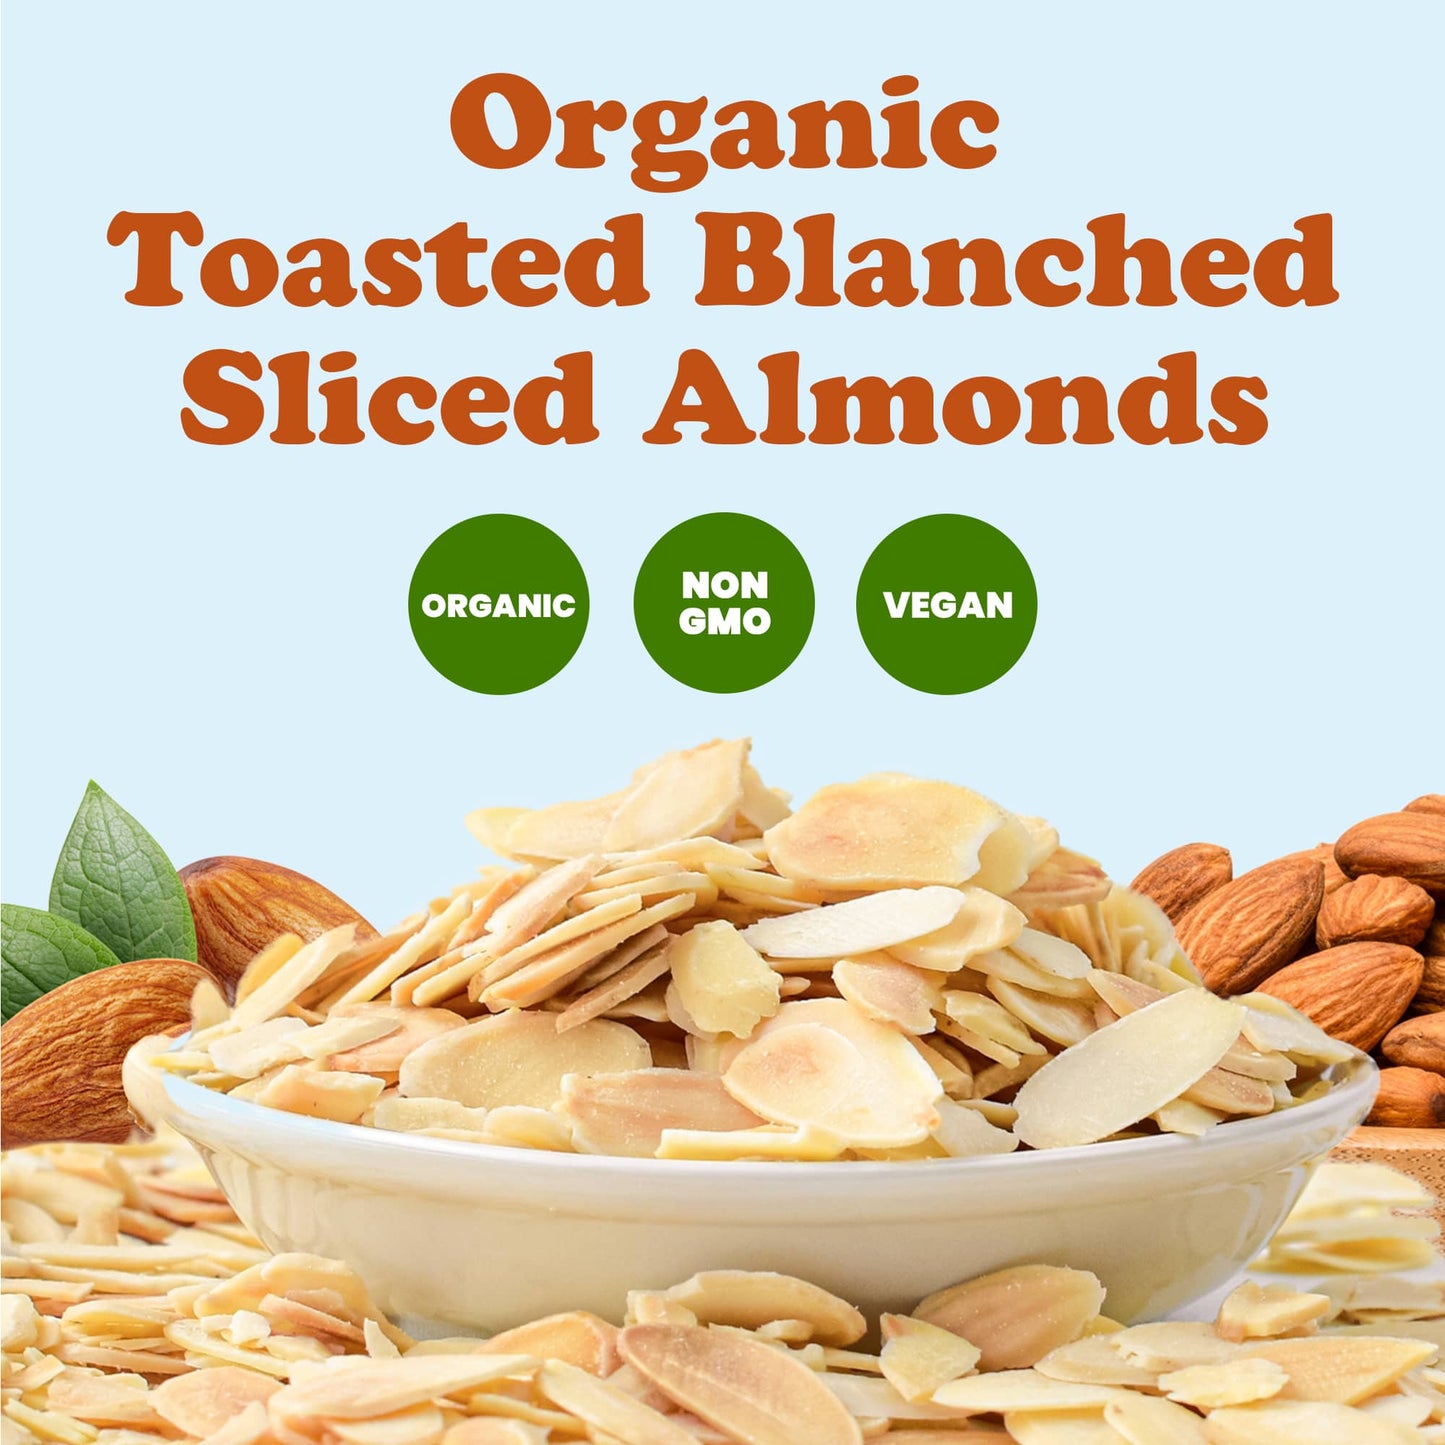 Organic Toasted Blanched Sliced Almonds – Unsalted & Dry Roasted, Premium Non-GMO Almond Nuts, Perfect for Salads, Snacks, Baking and Crunchy Topping. Keto & Paleo Friendly. Vegan & Kosher